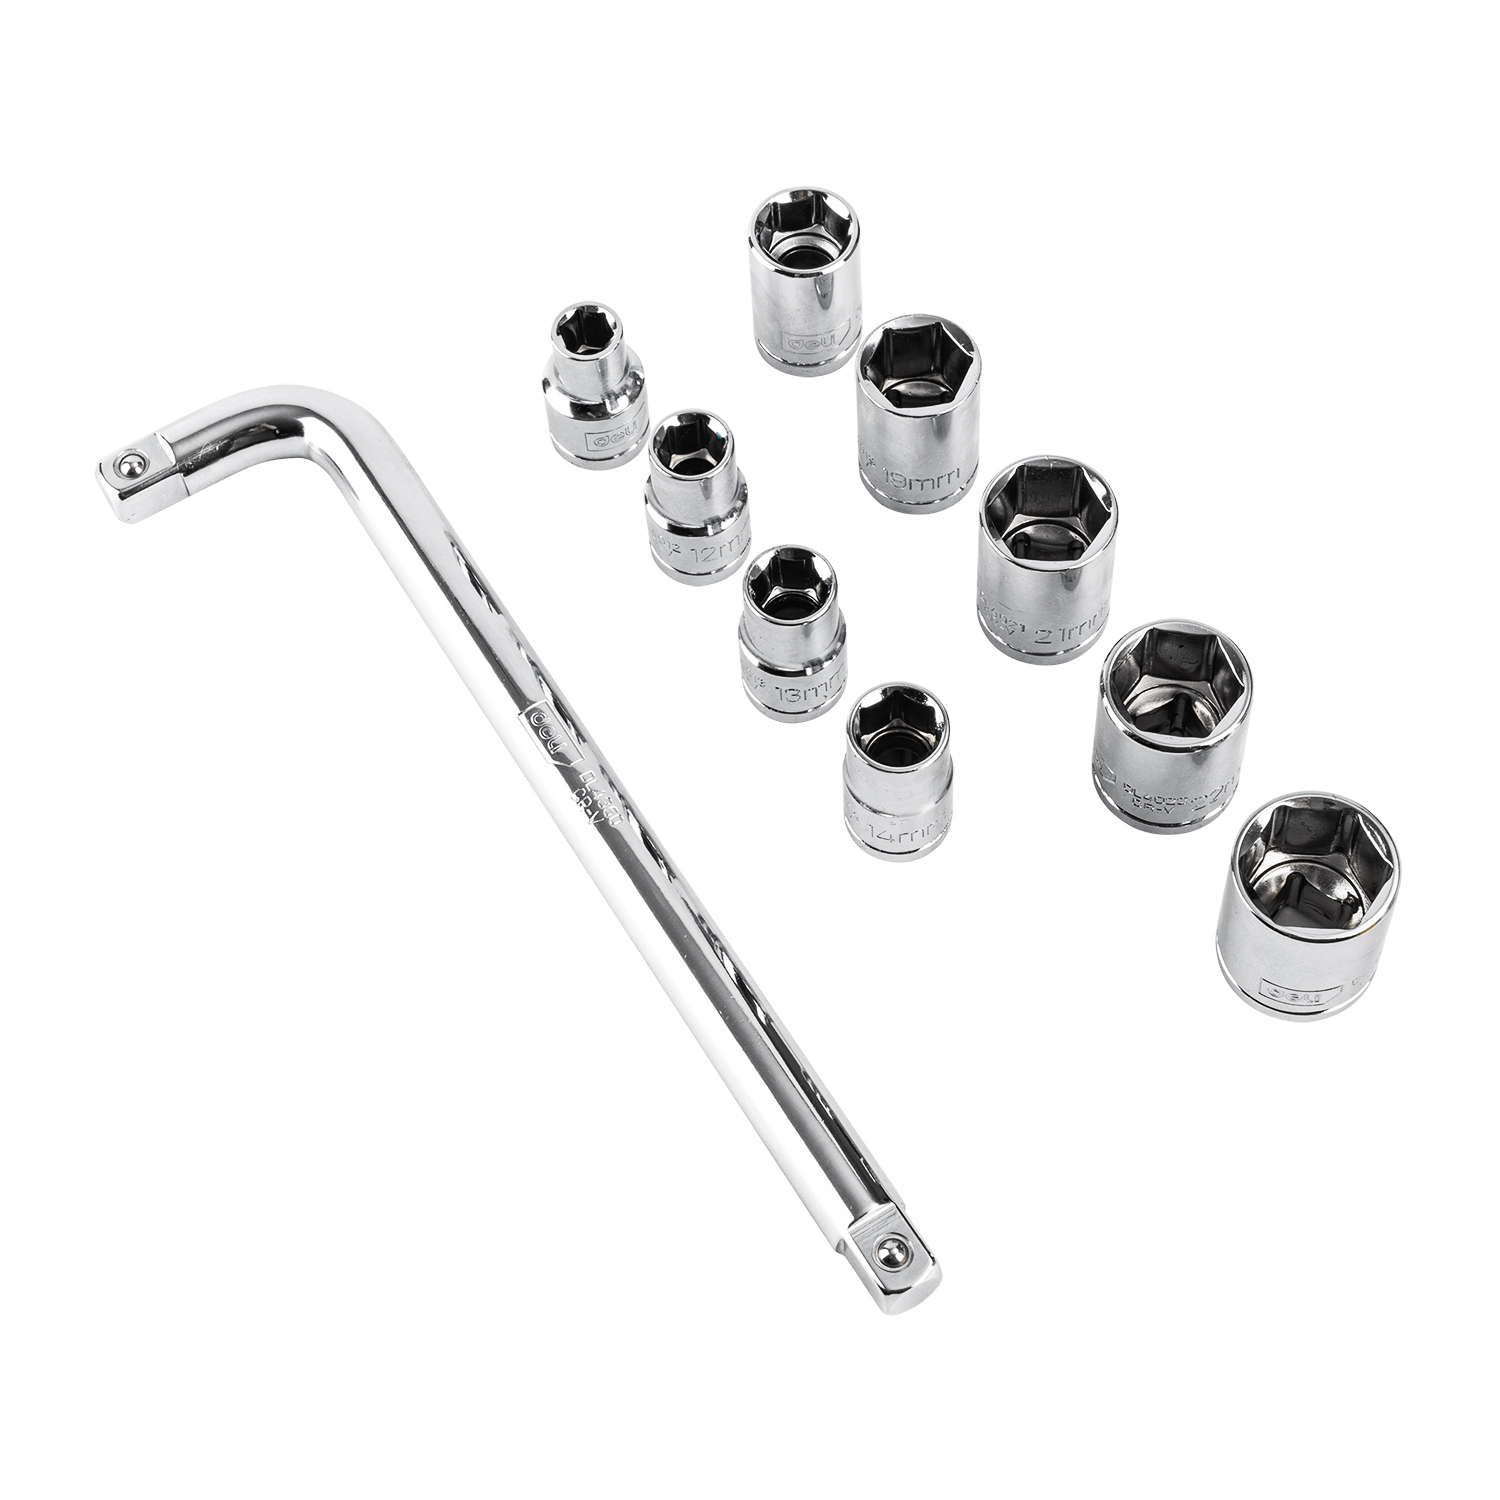 Chrome-plated Hex Sockets And Accessories For auto repair